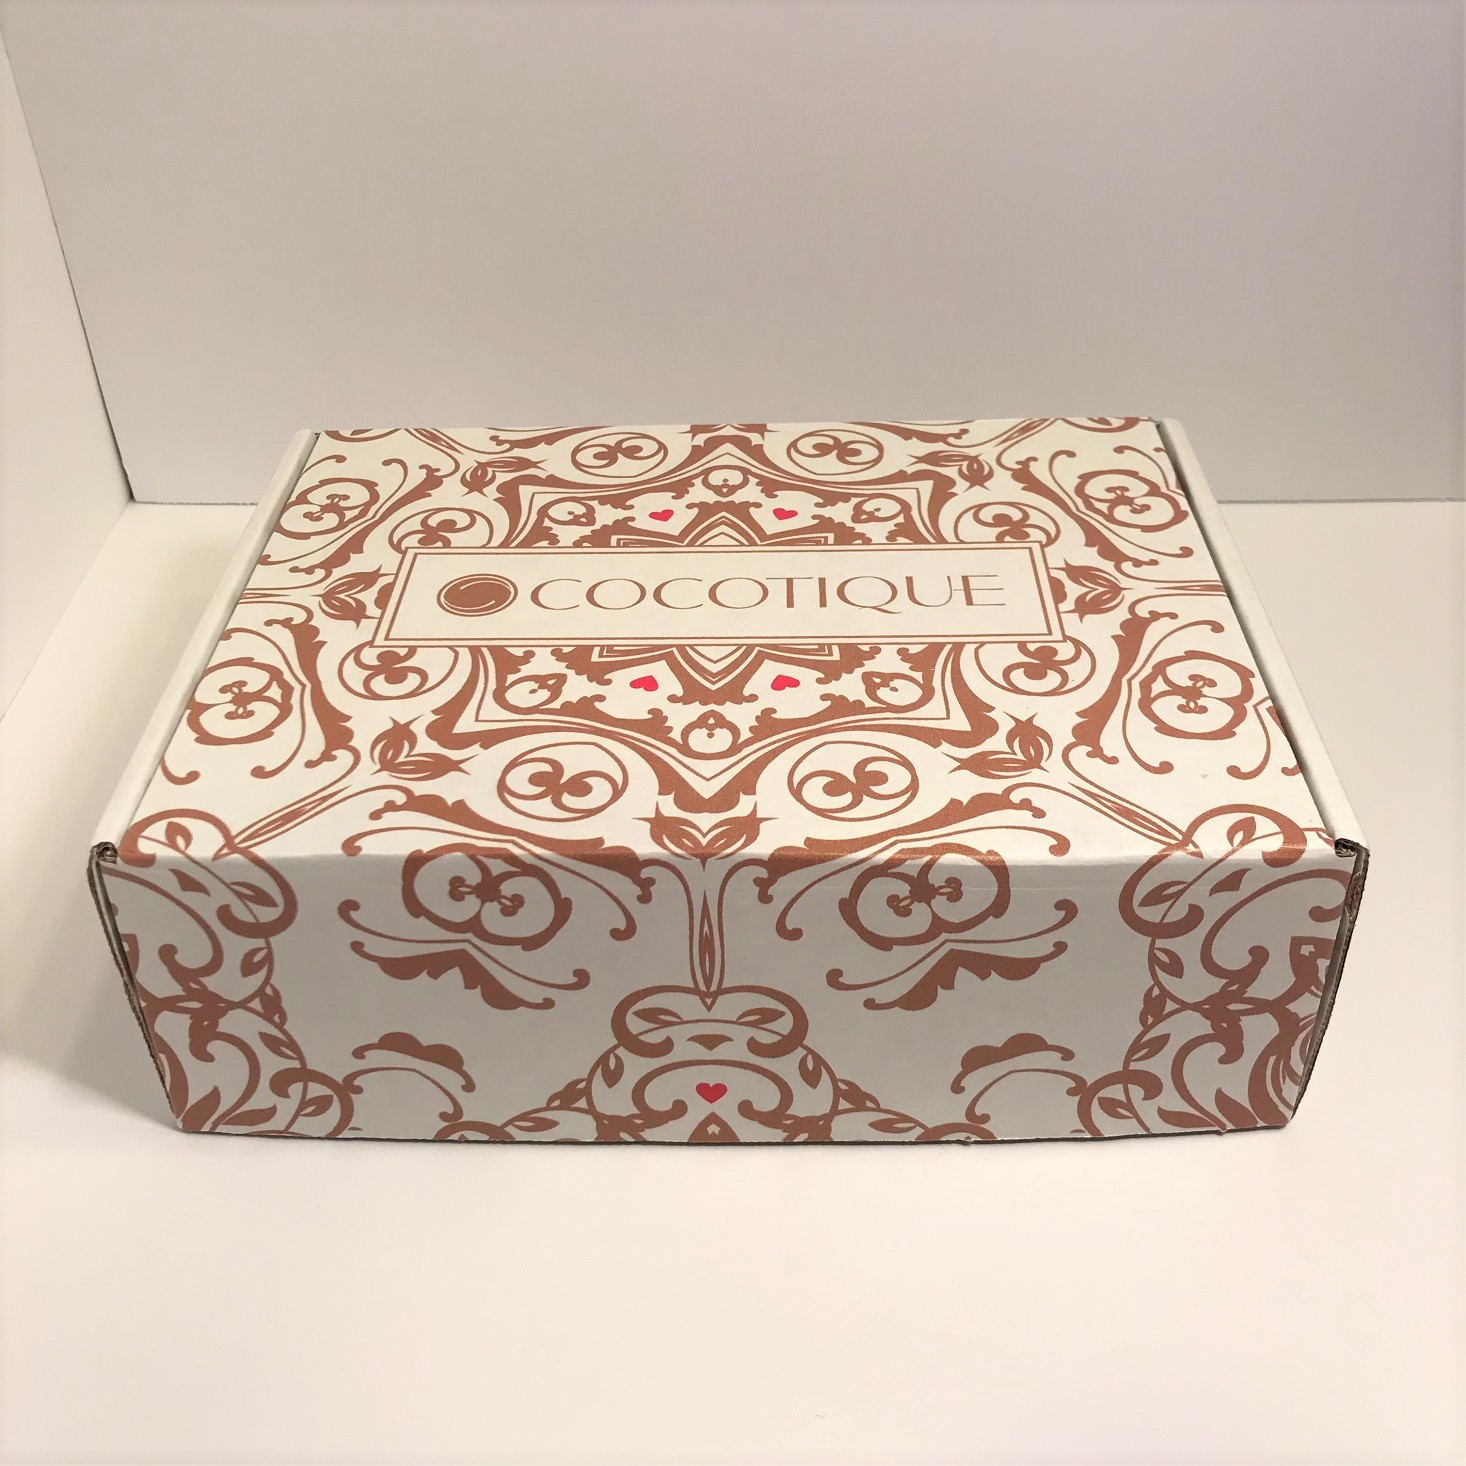 Cocotique Women Of Color Subscription Box Review + Coupon – October 2018